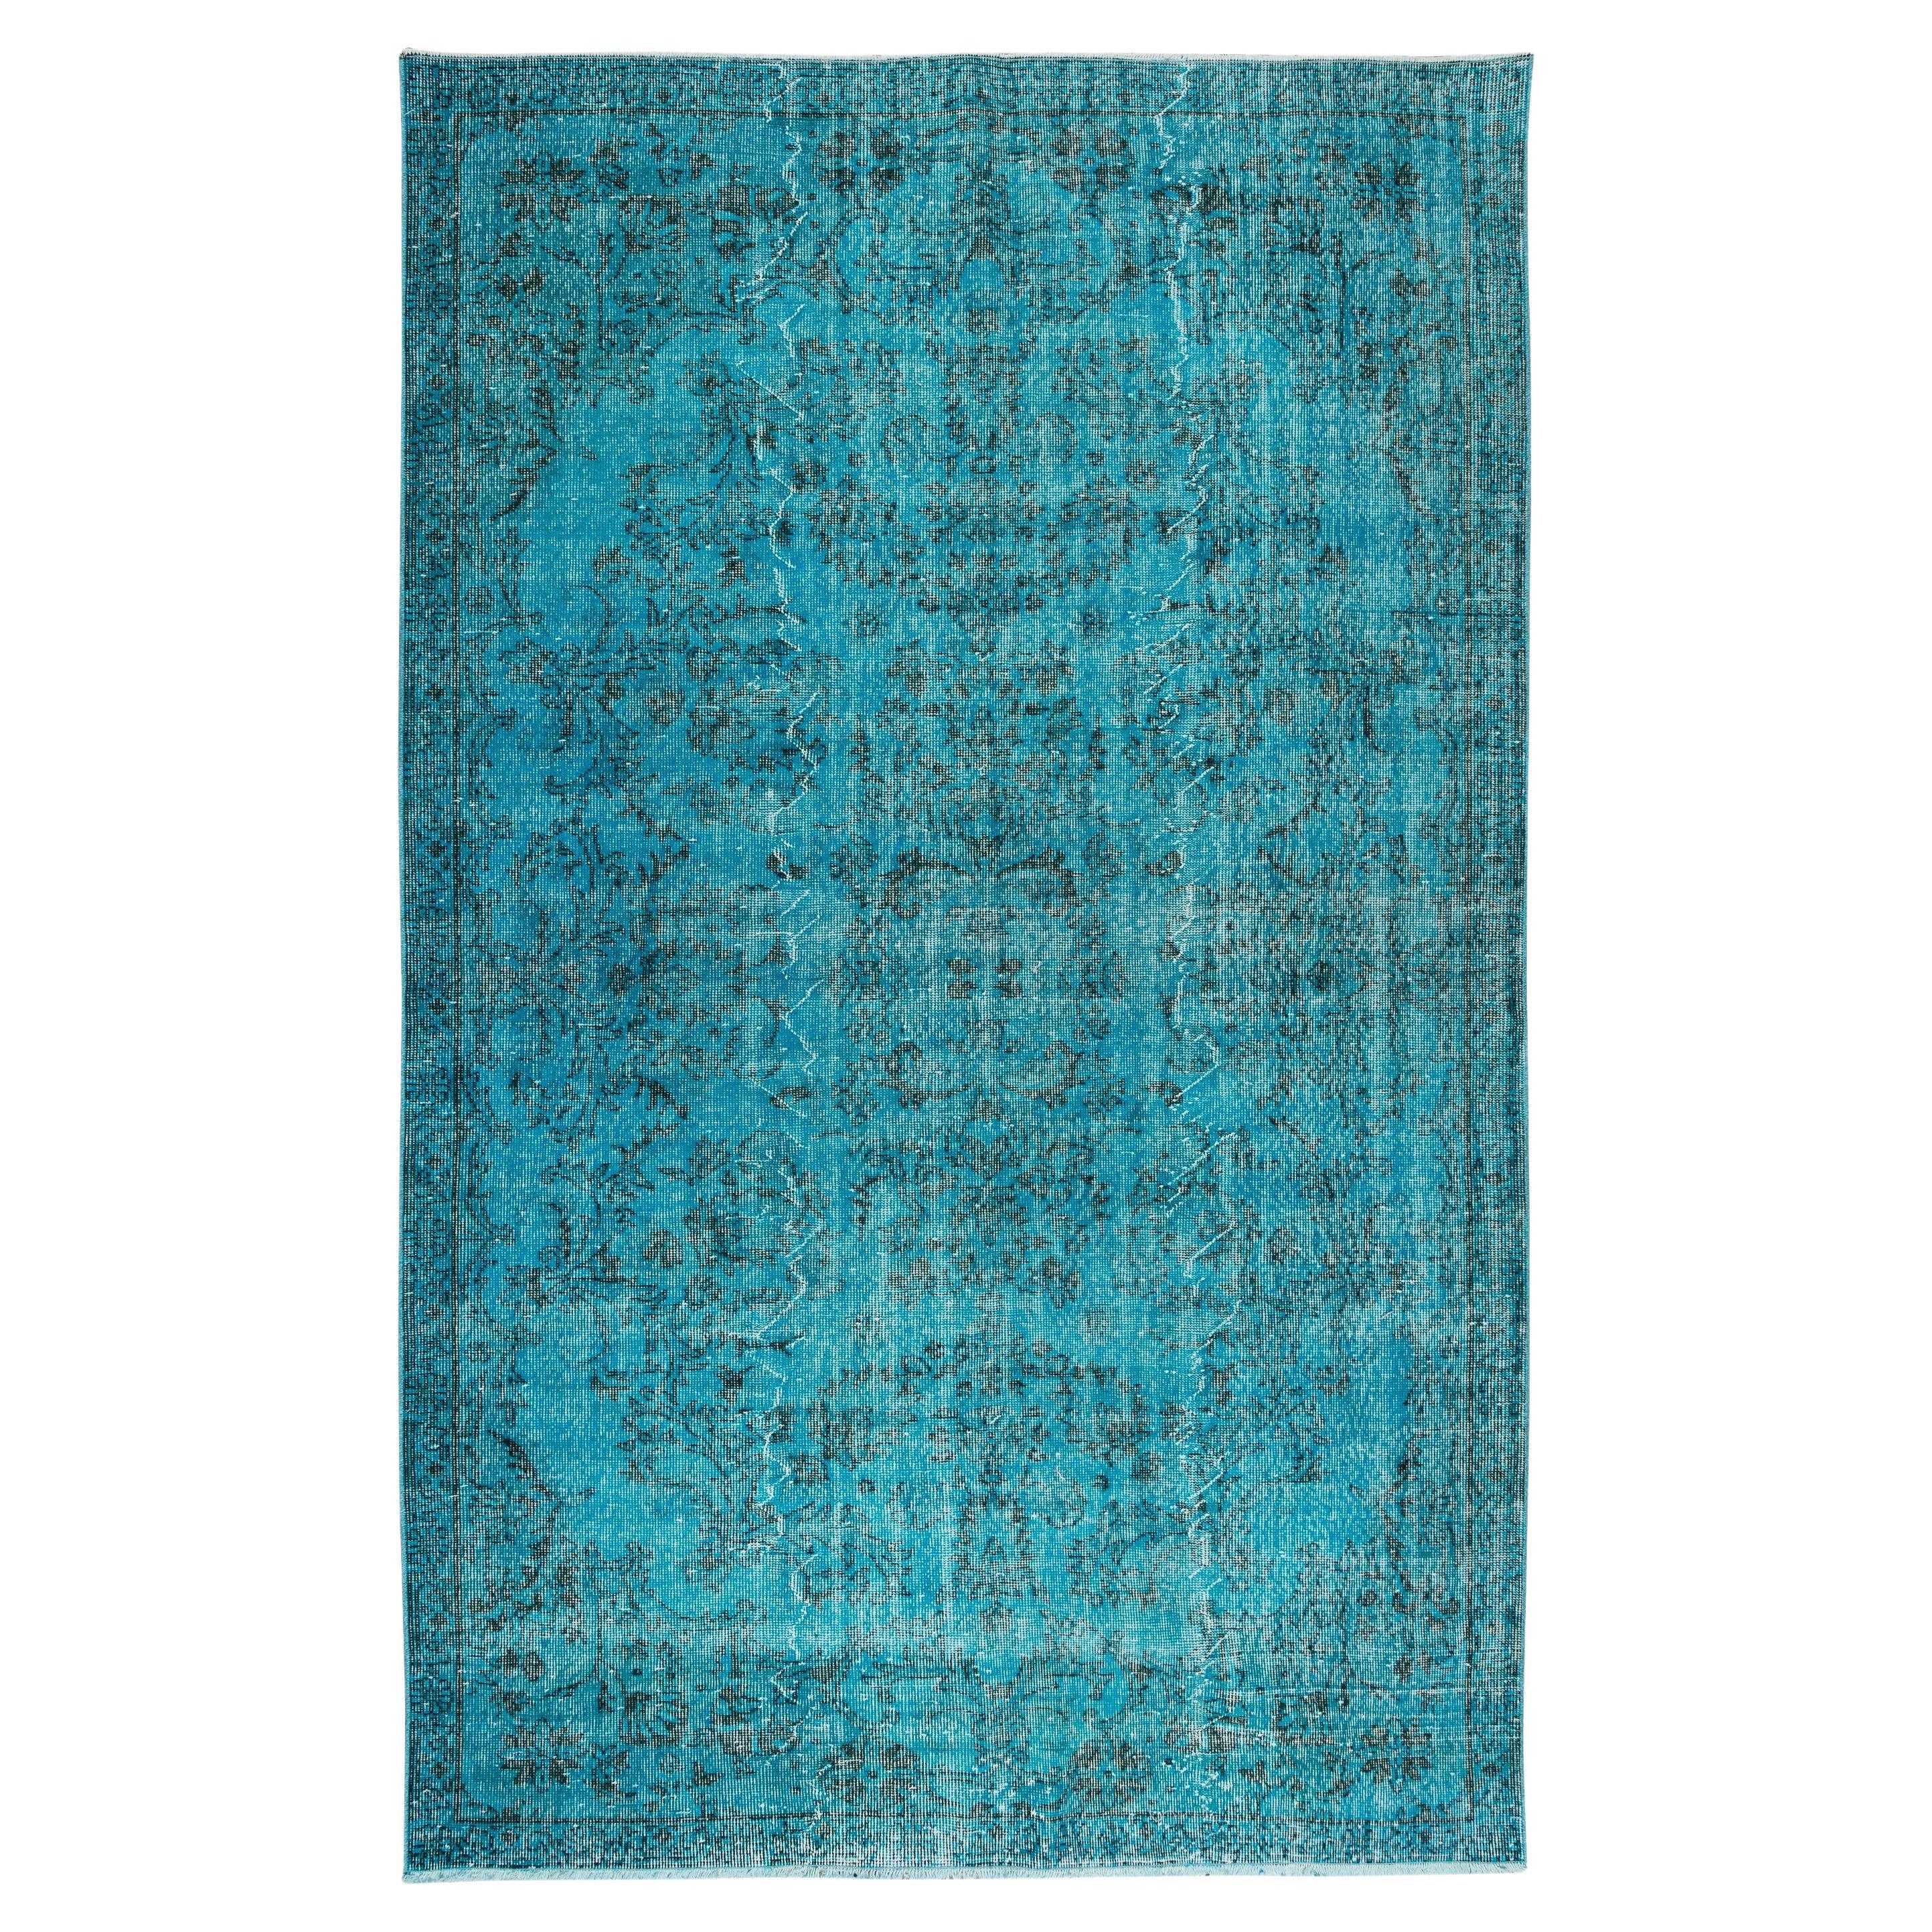 Handmade Vintage Turkish Area Rug Re-Dyed in Teal for Modern Interiors